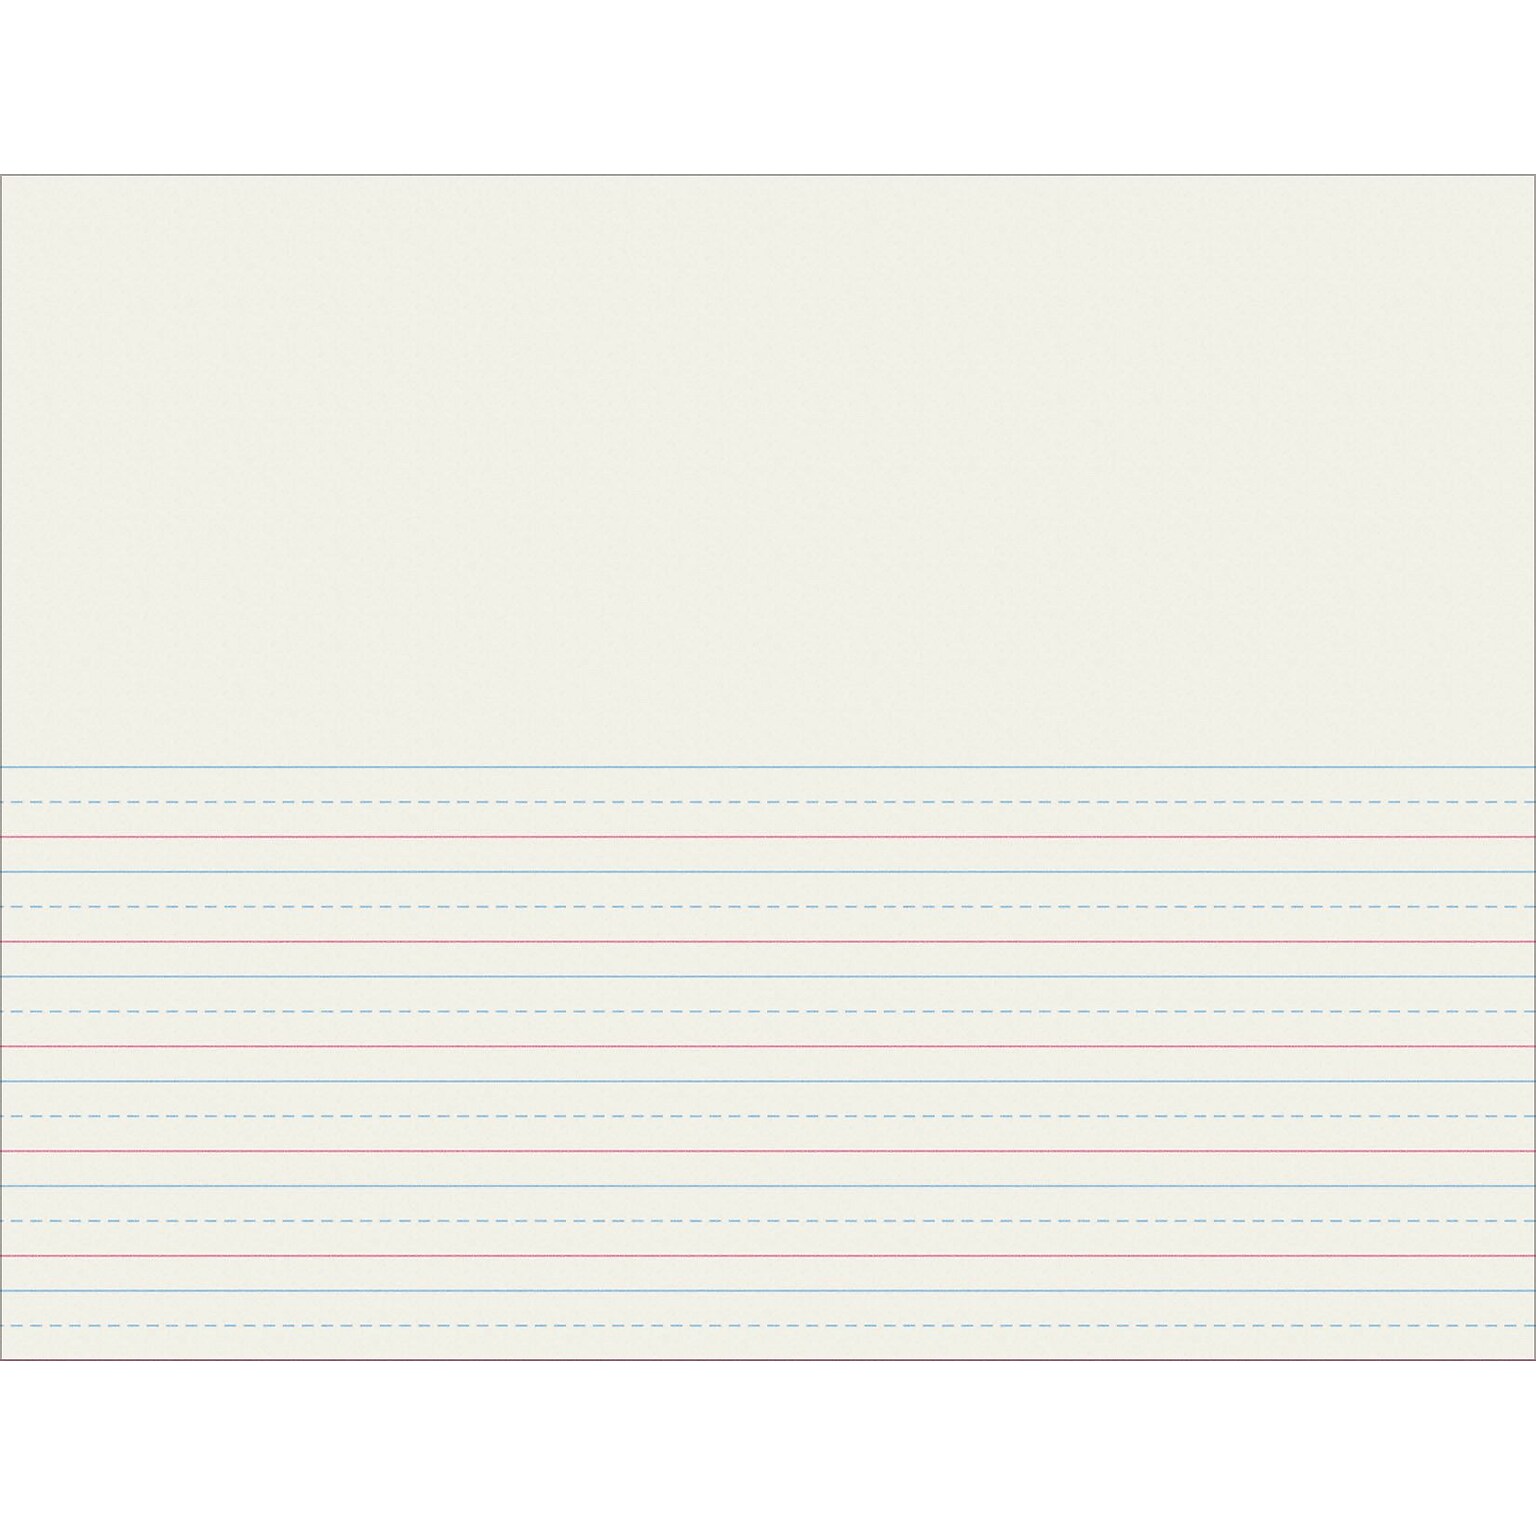 Pacon Storybook Paper for DNealian Programs 8-1/2 x 11, 1/2 Long Way Ruled, White, 500 Sheets/Pack (PAC2693)